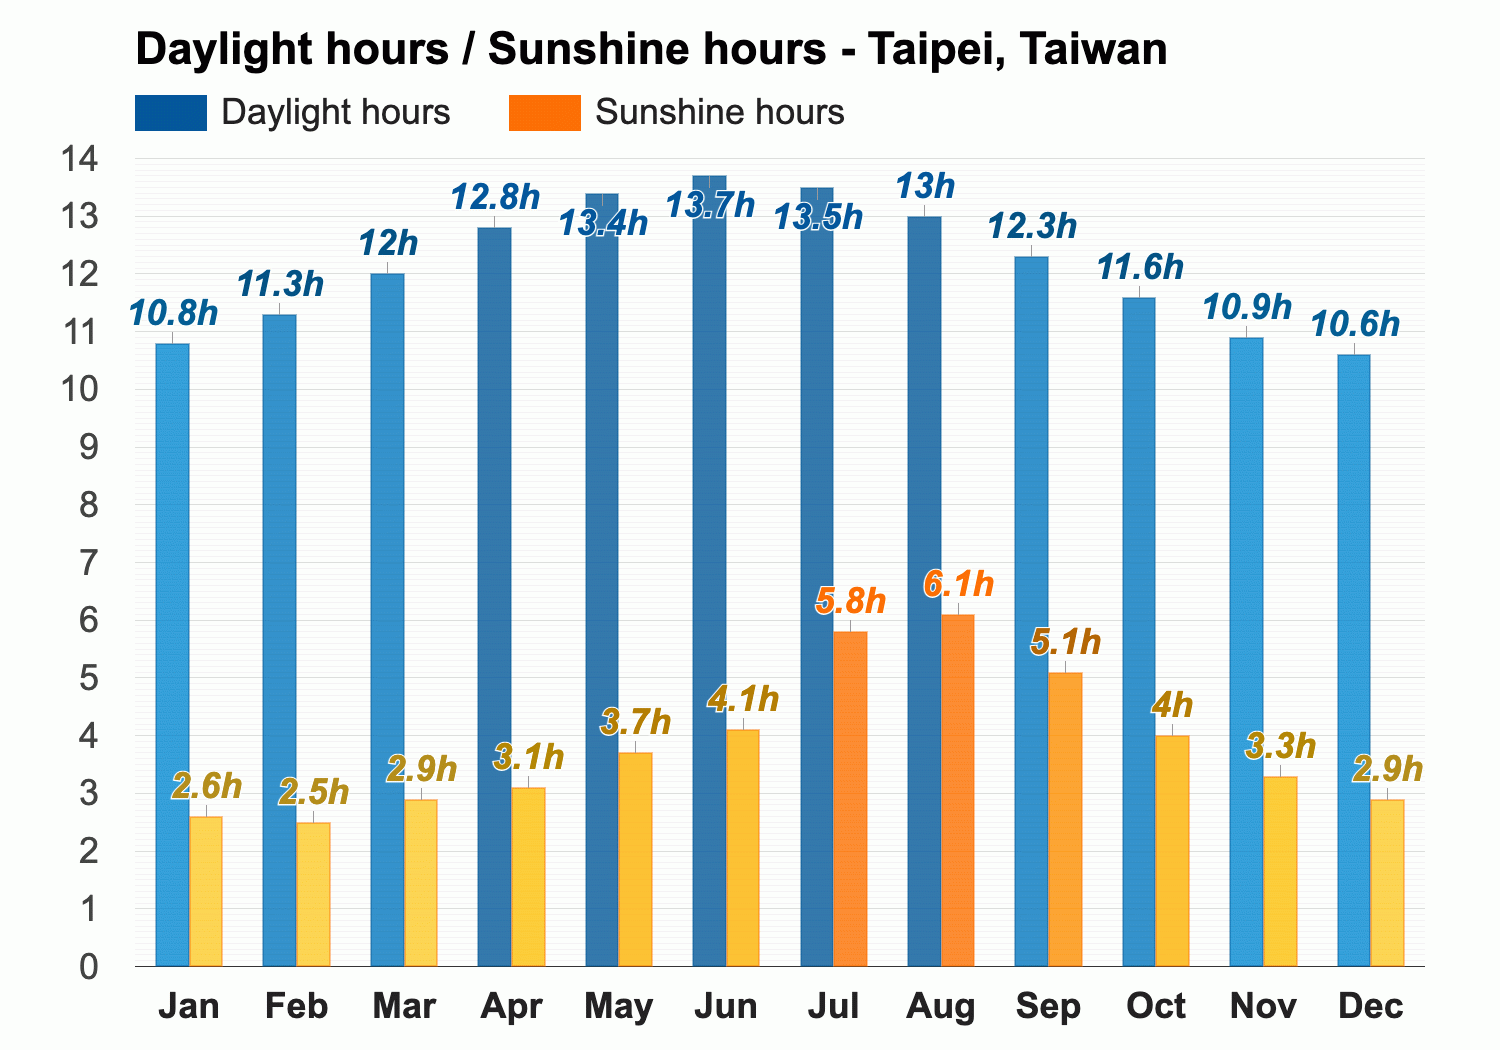 Taipei, Taiwan - Climate & Monthly weather forecast